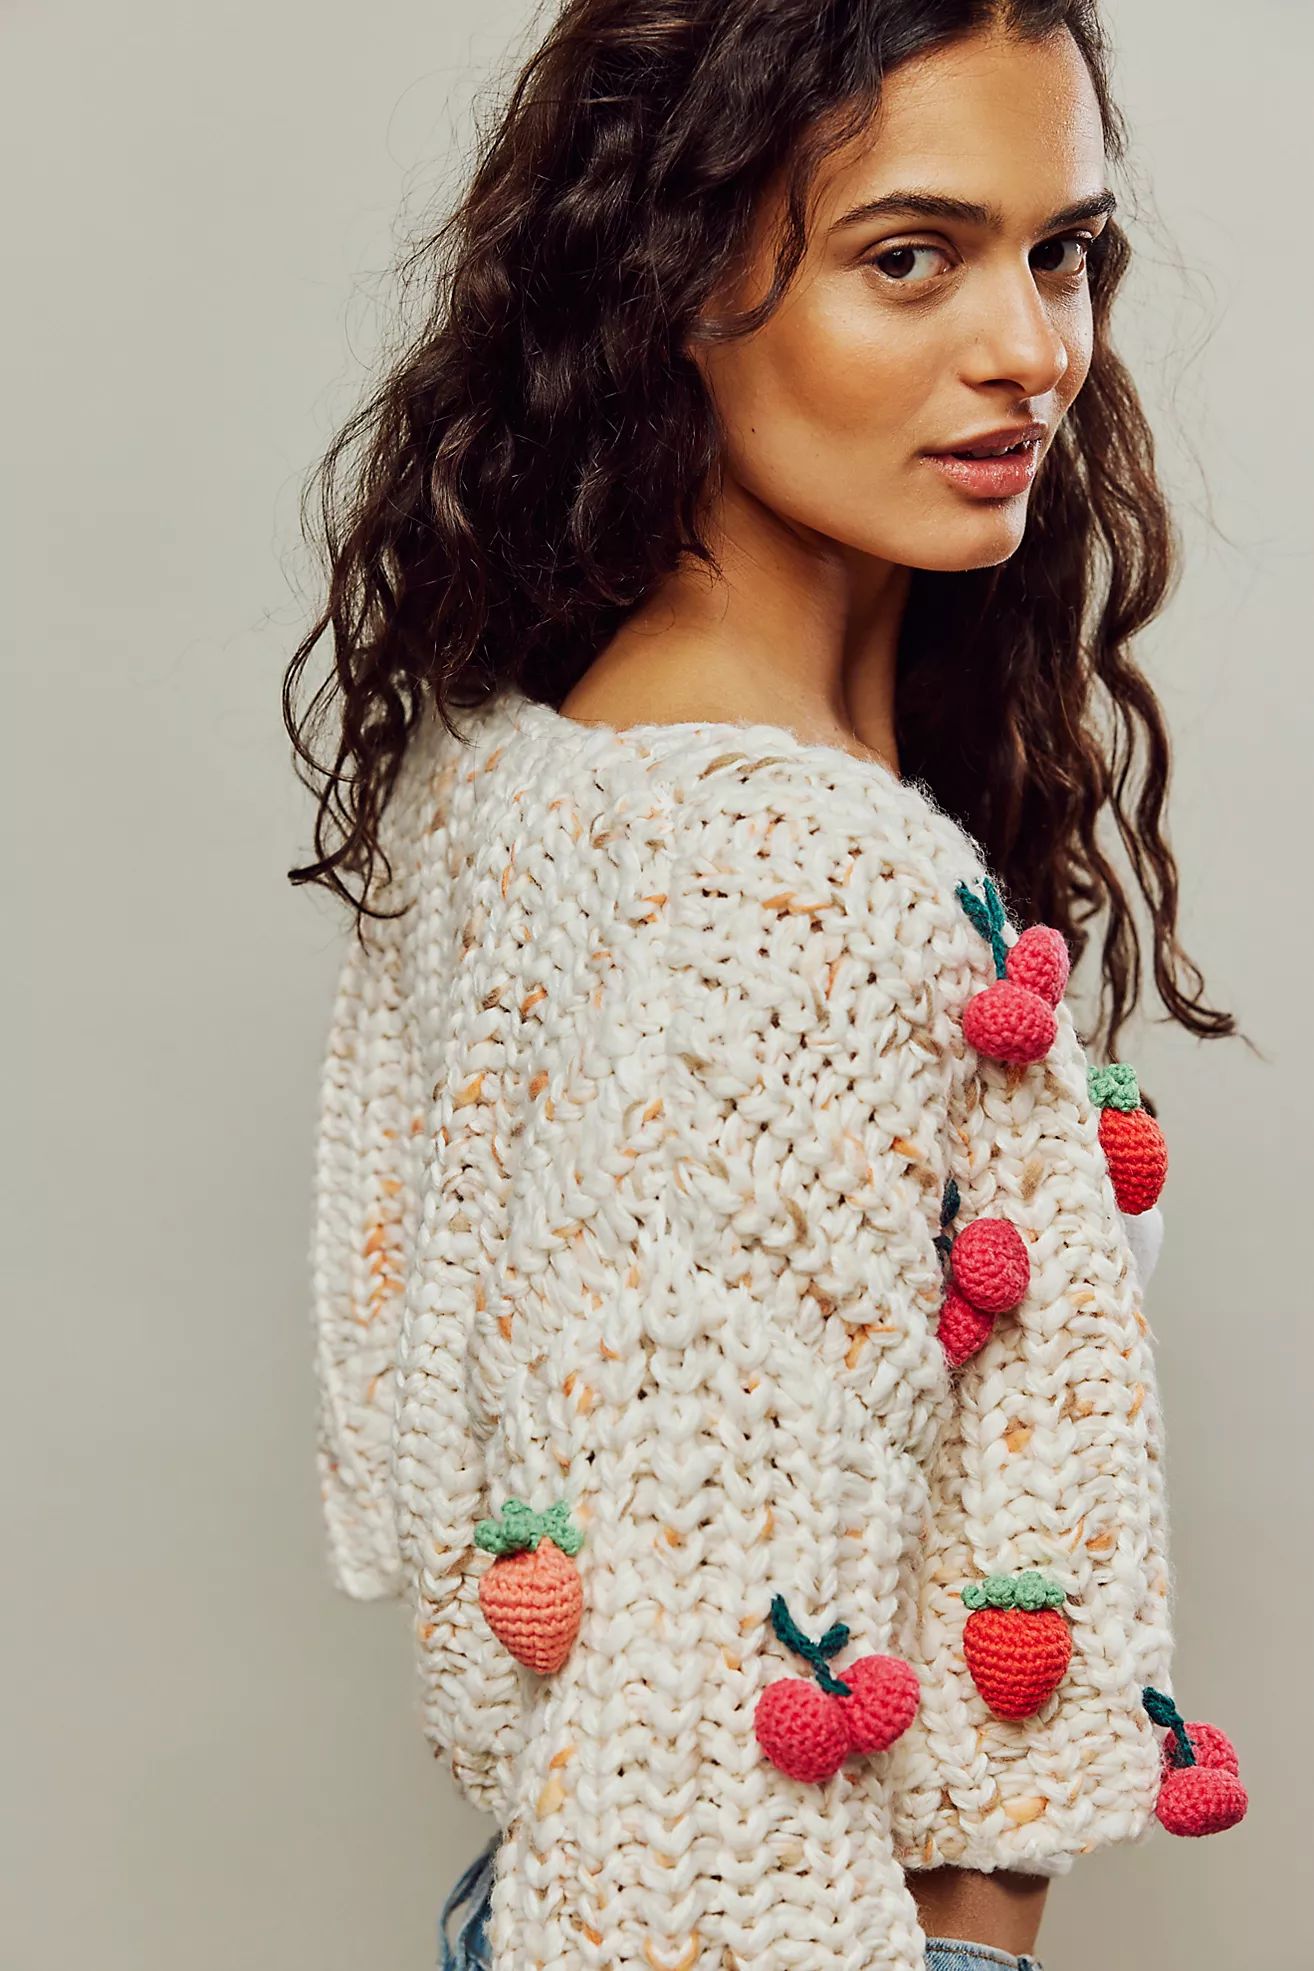 Similar Items

               
            Homestead Cable Cardigan
            
                ... | Free People (Global - UK&FR Excluded)